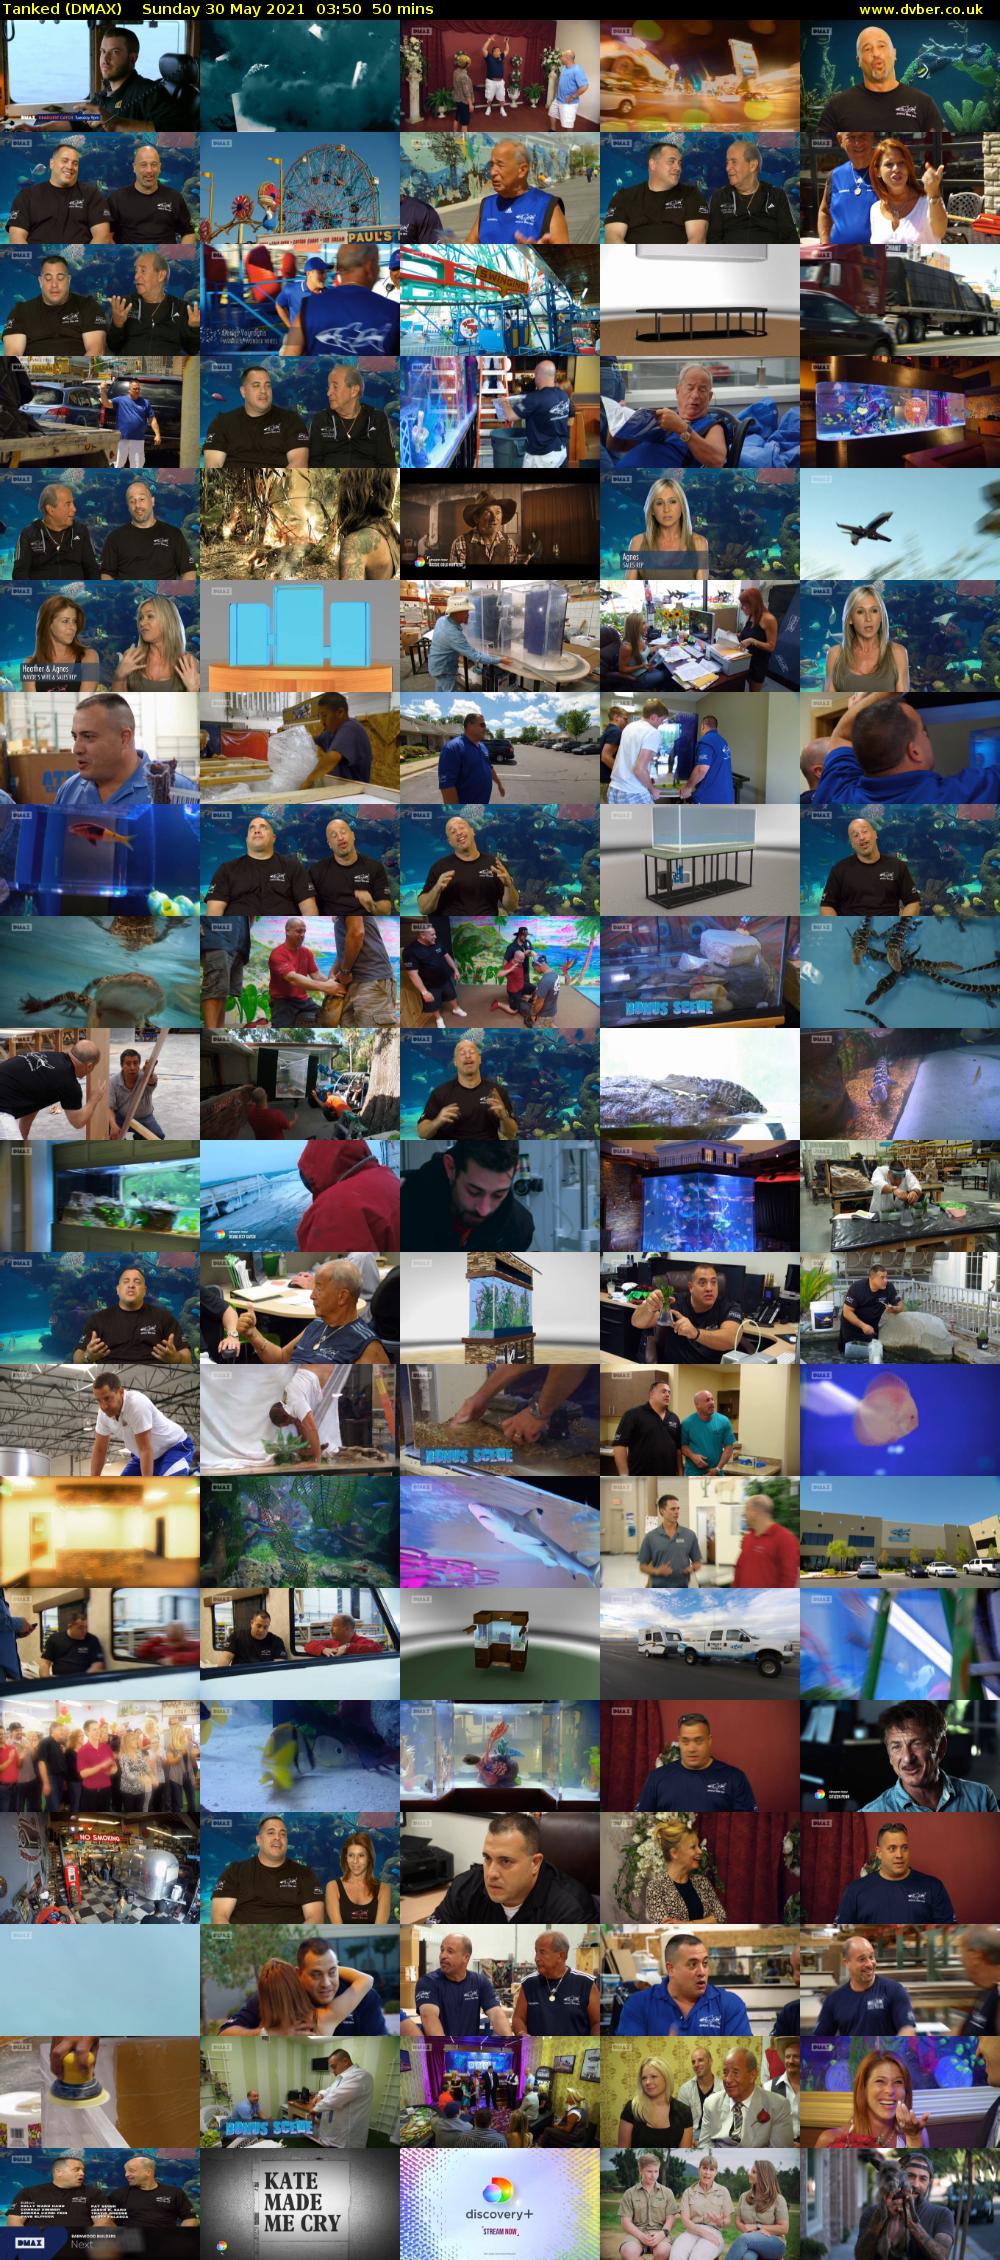 Tanked (DMAX) Sunday 30 May 2021 03:50 - 04:40